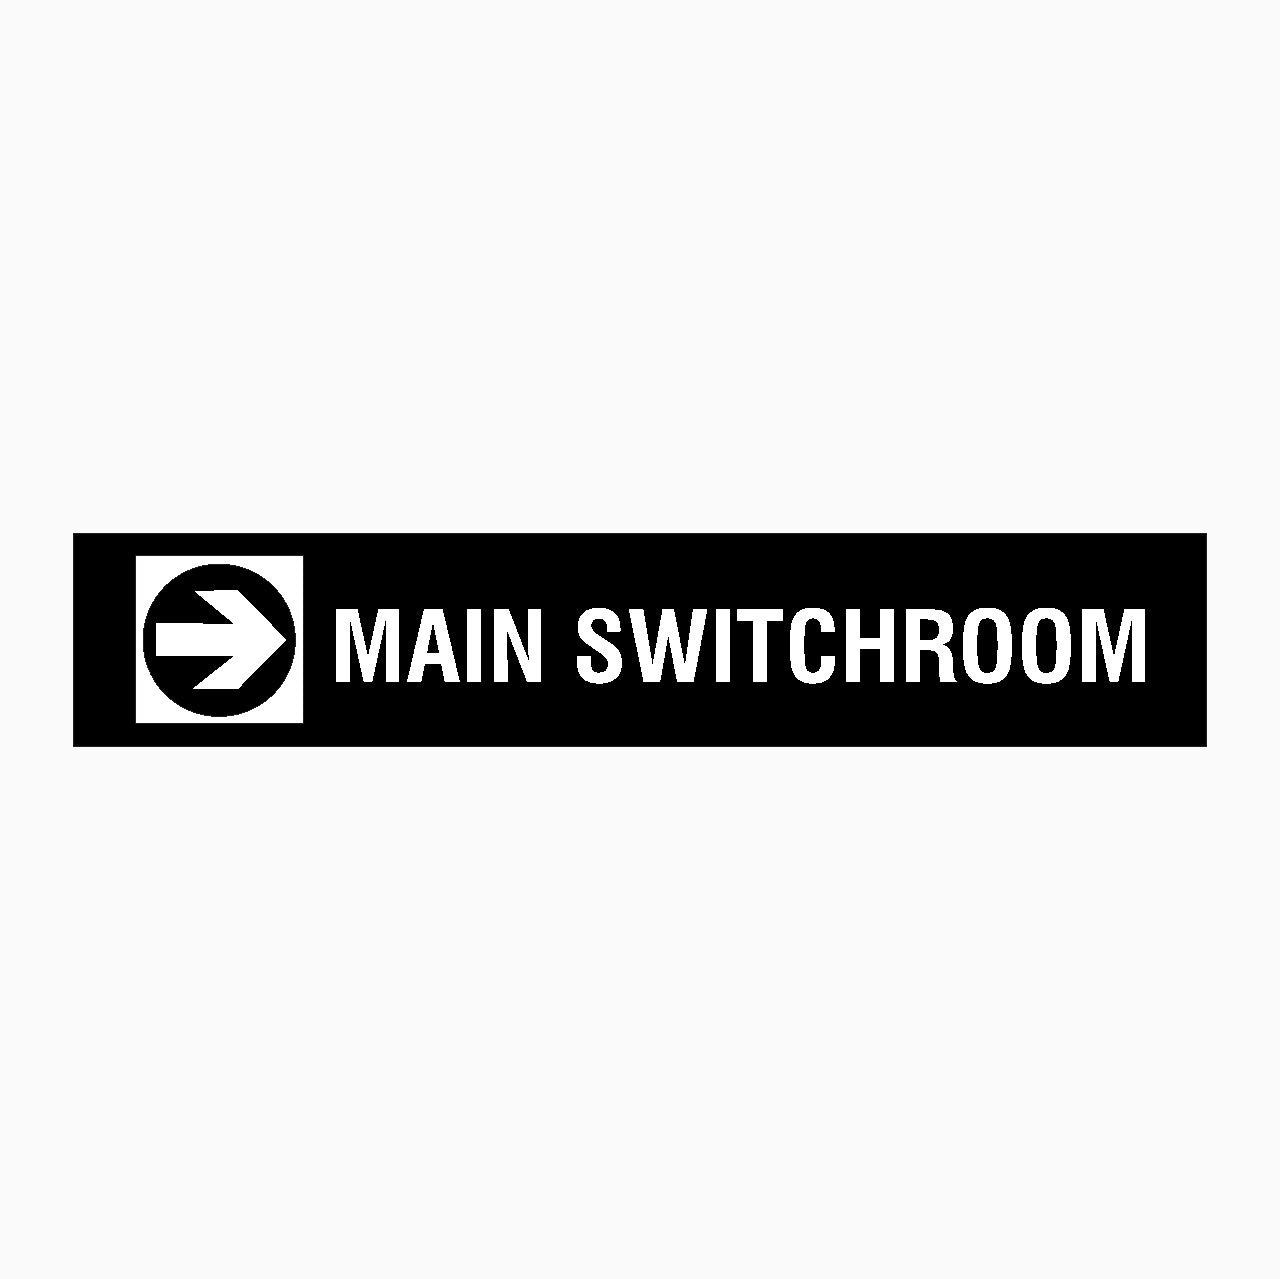 MAIN SWITCH ROOM - RIGHT ARROW SIGN